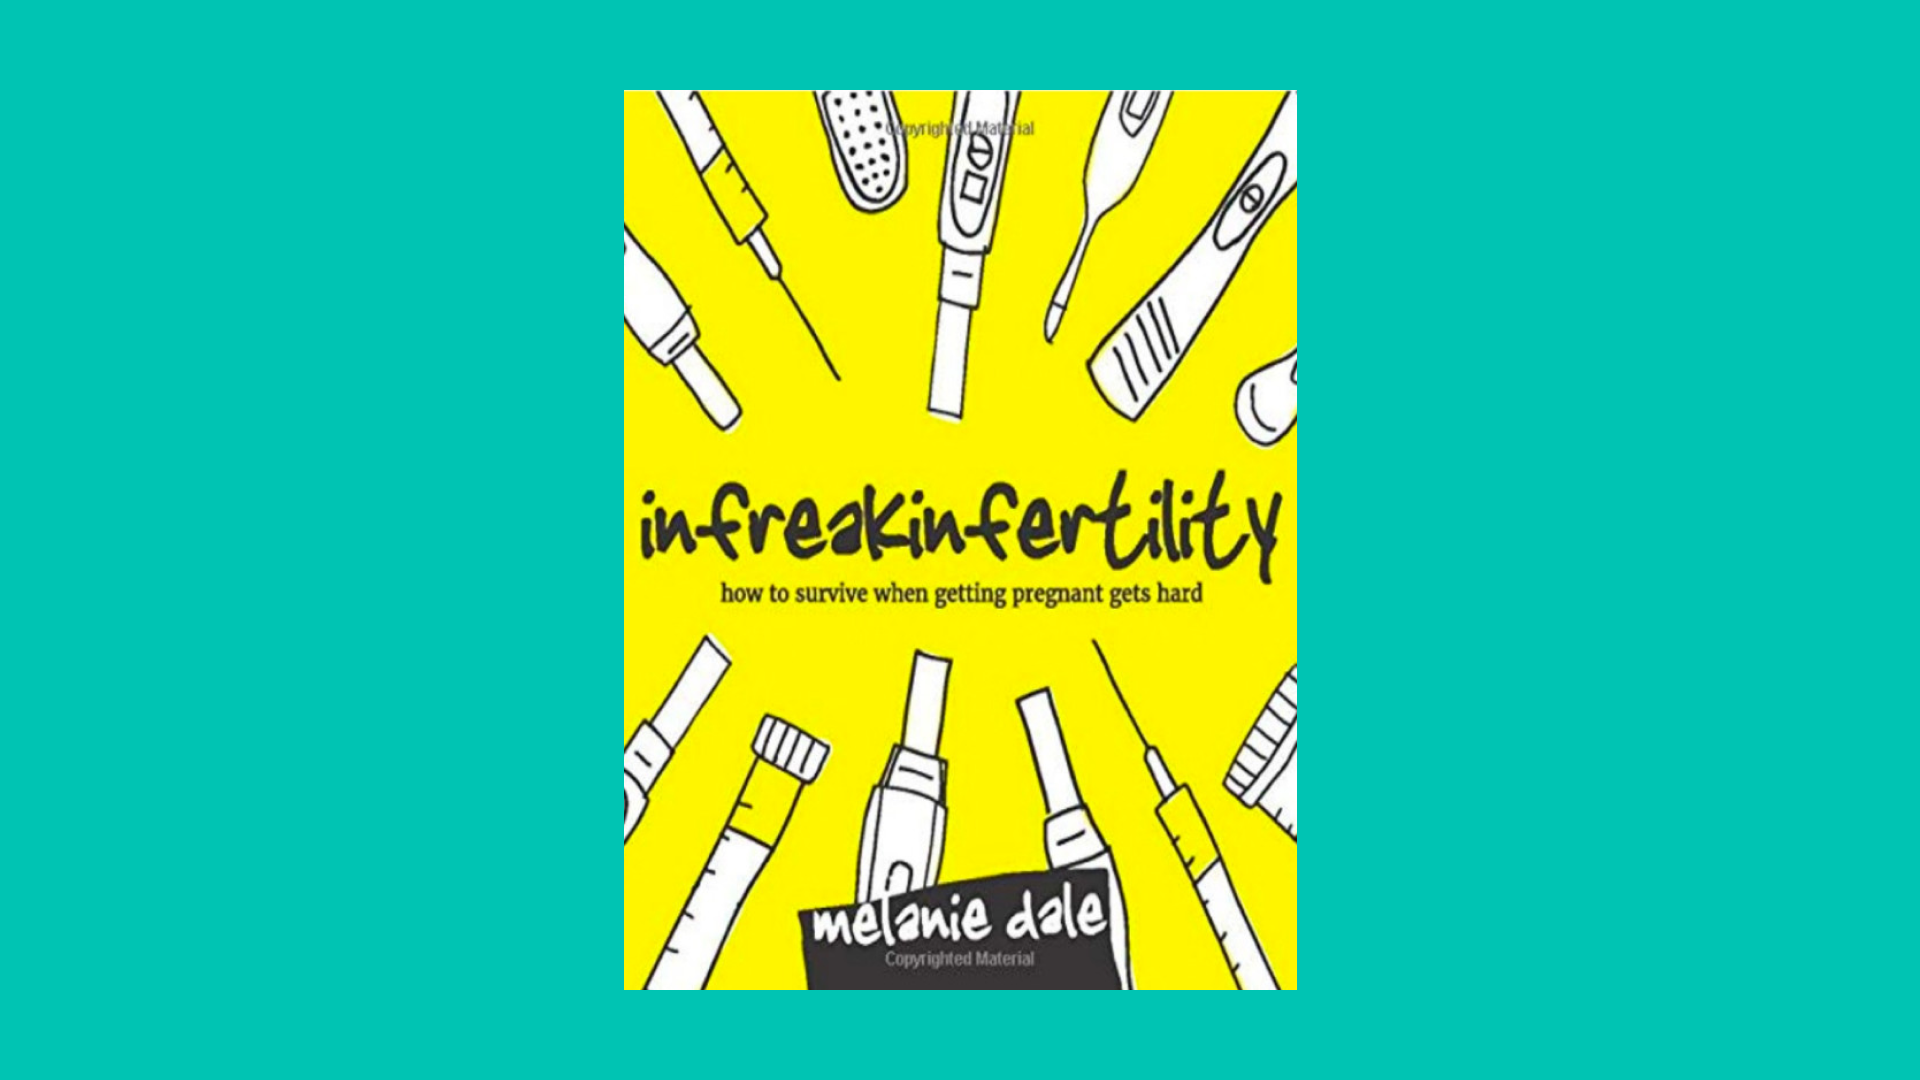 “Infreakinfertility: How to Survive When Getting Pregnant Gets Hard” by Melanie Dale